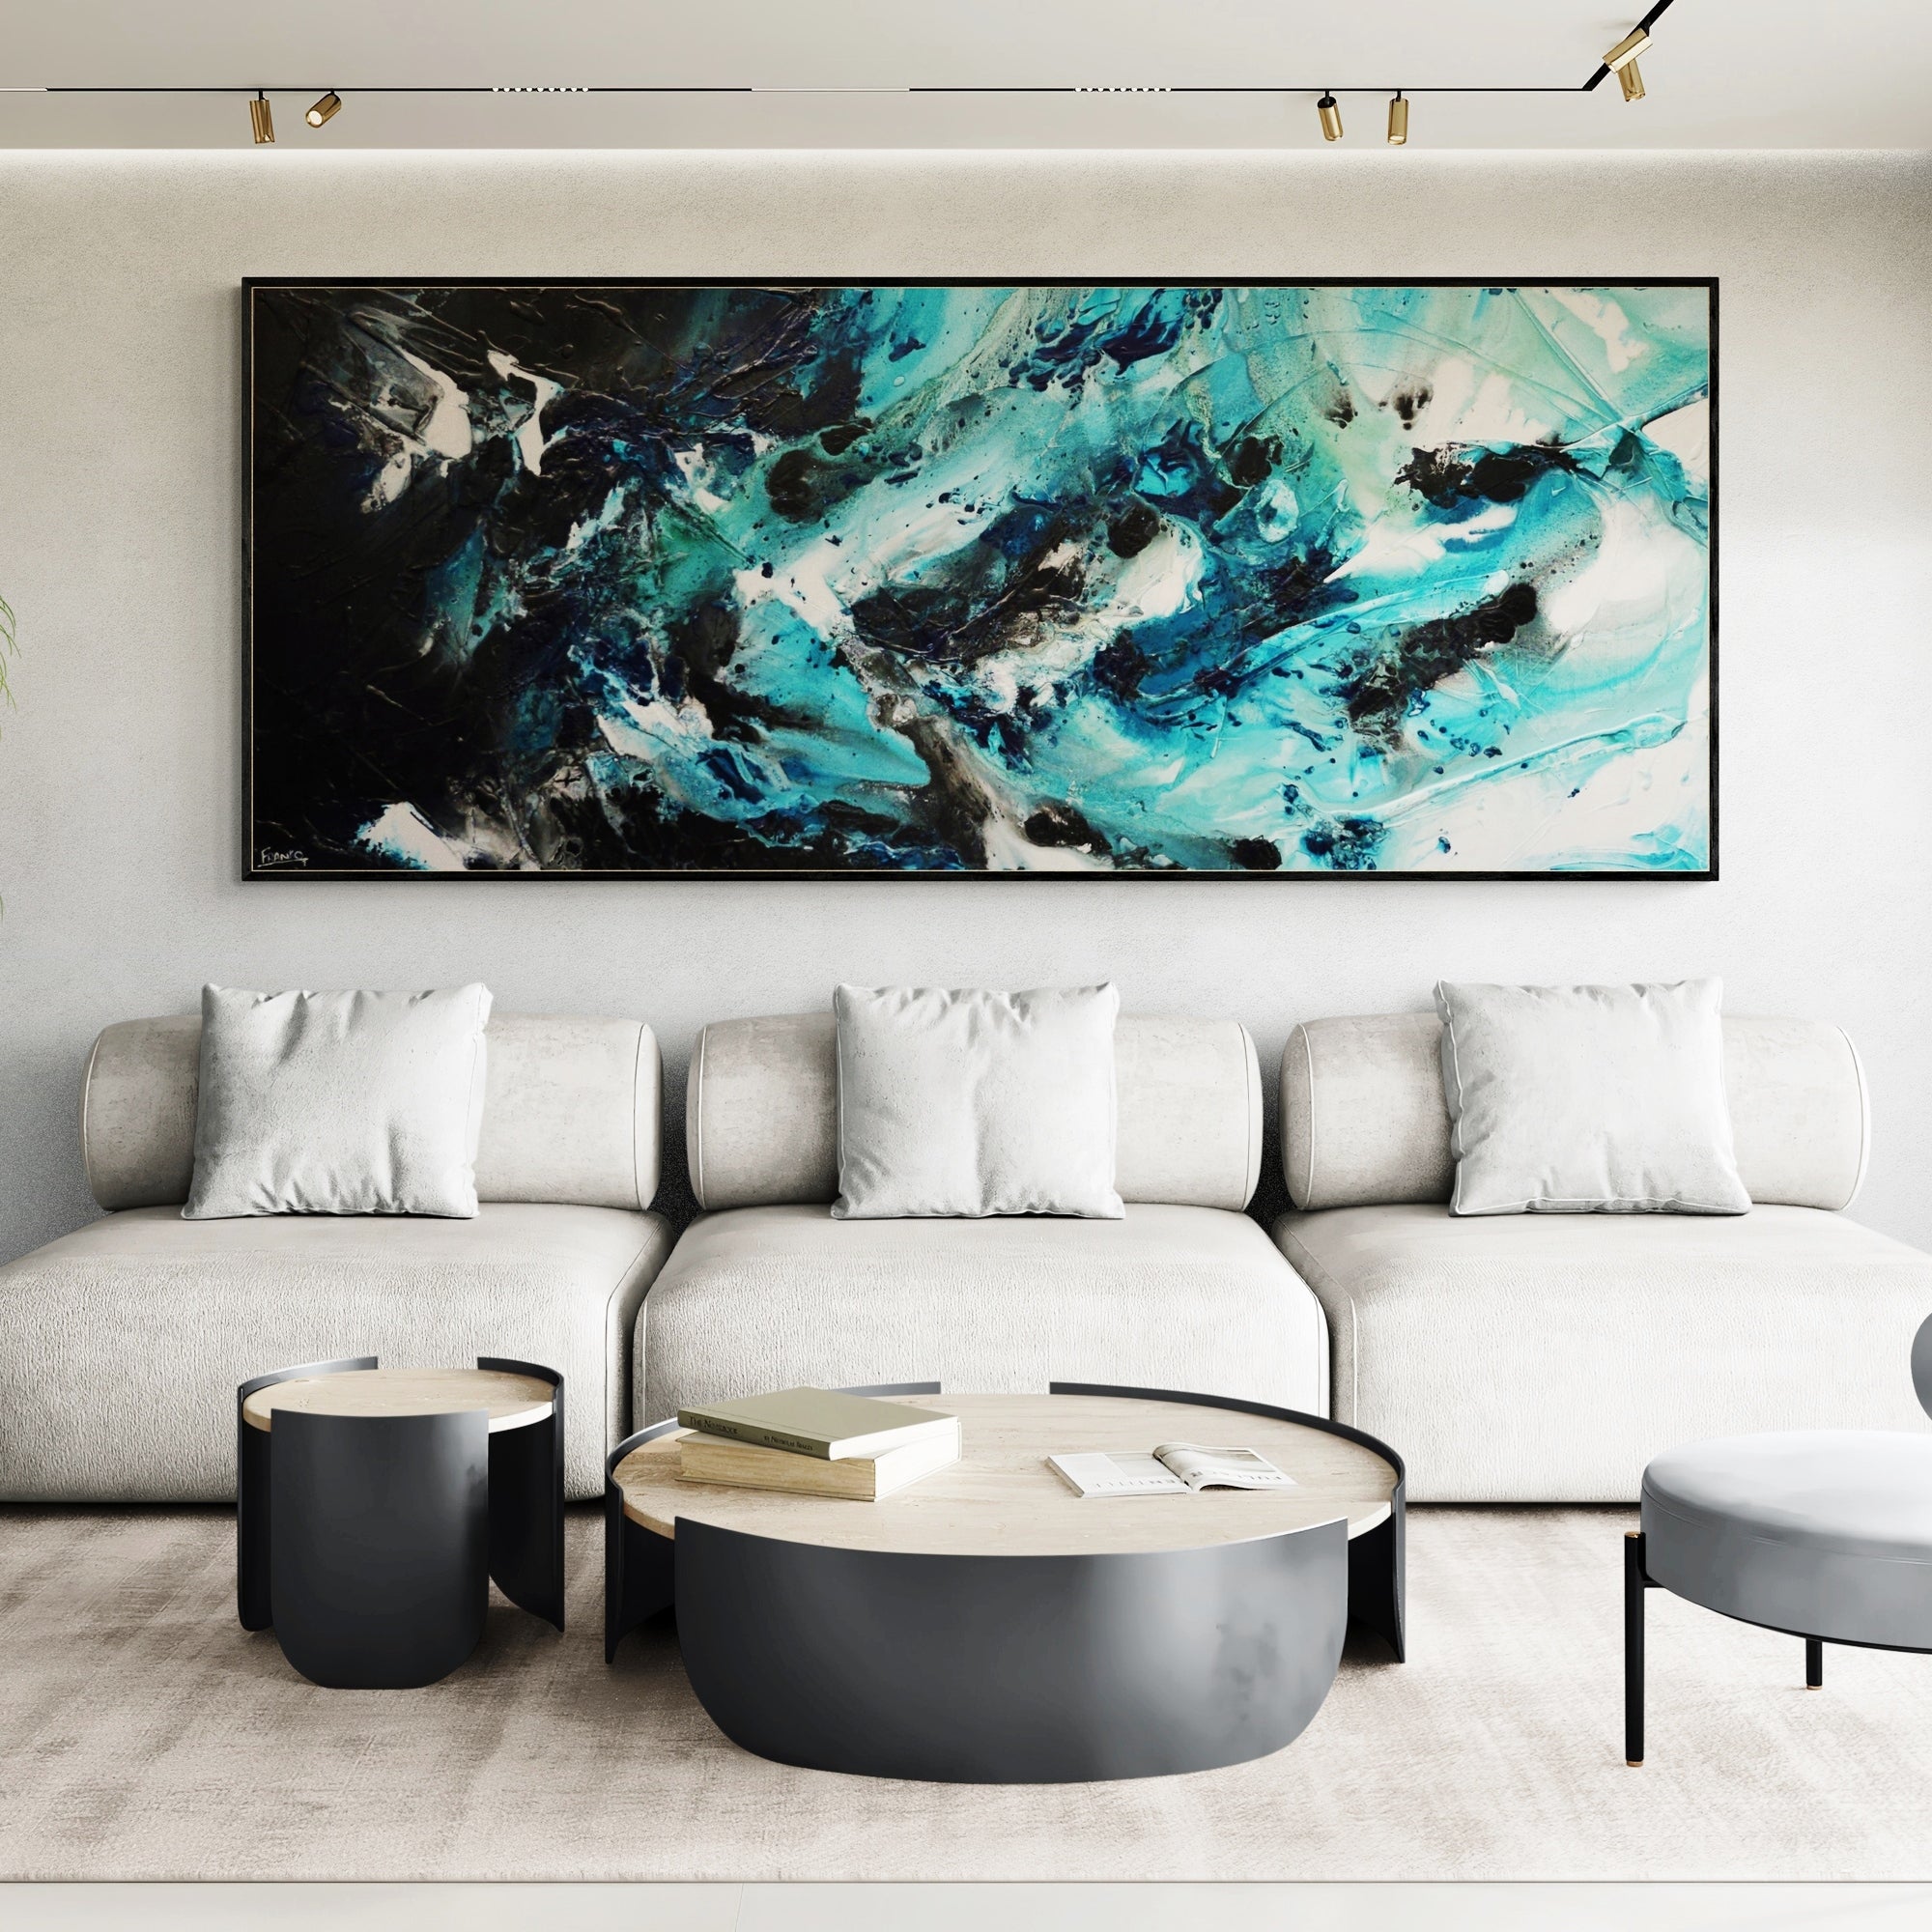 Southern Impact 240cm x 100cm Teal Black Textured Abstract Painting